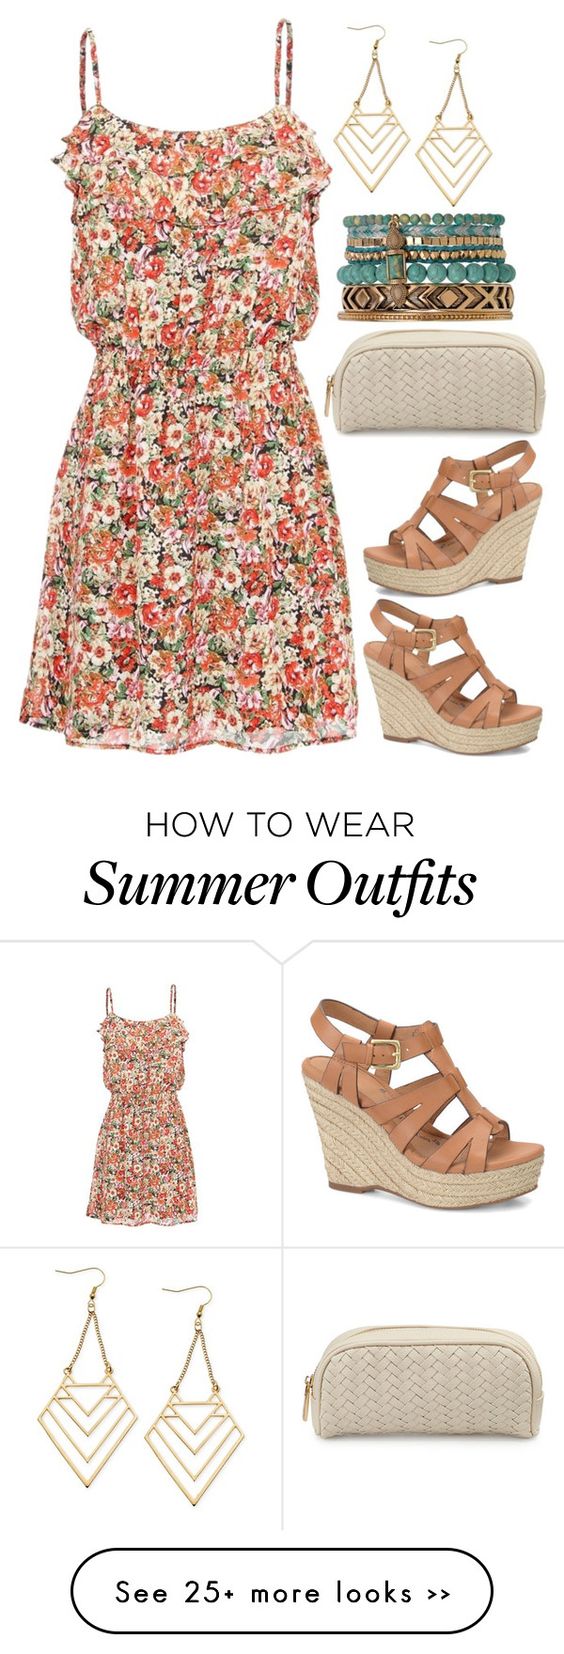 16 Cool Stylish Summer Outfits For Stylish Women - Her Style Code